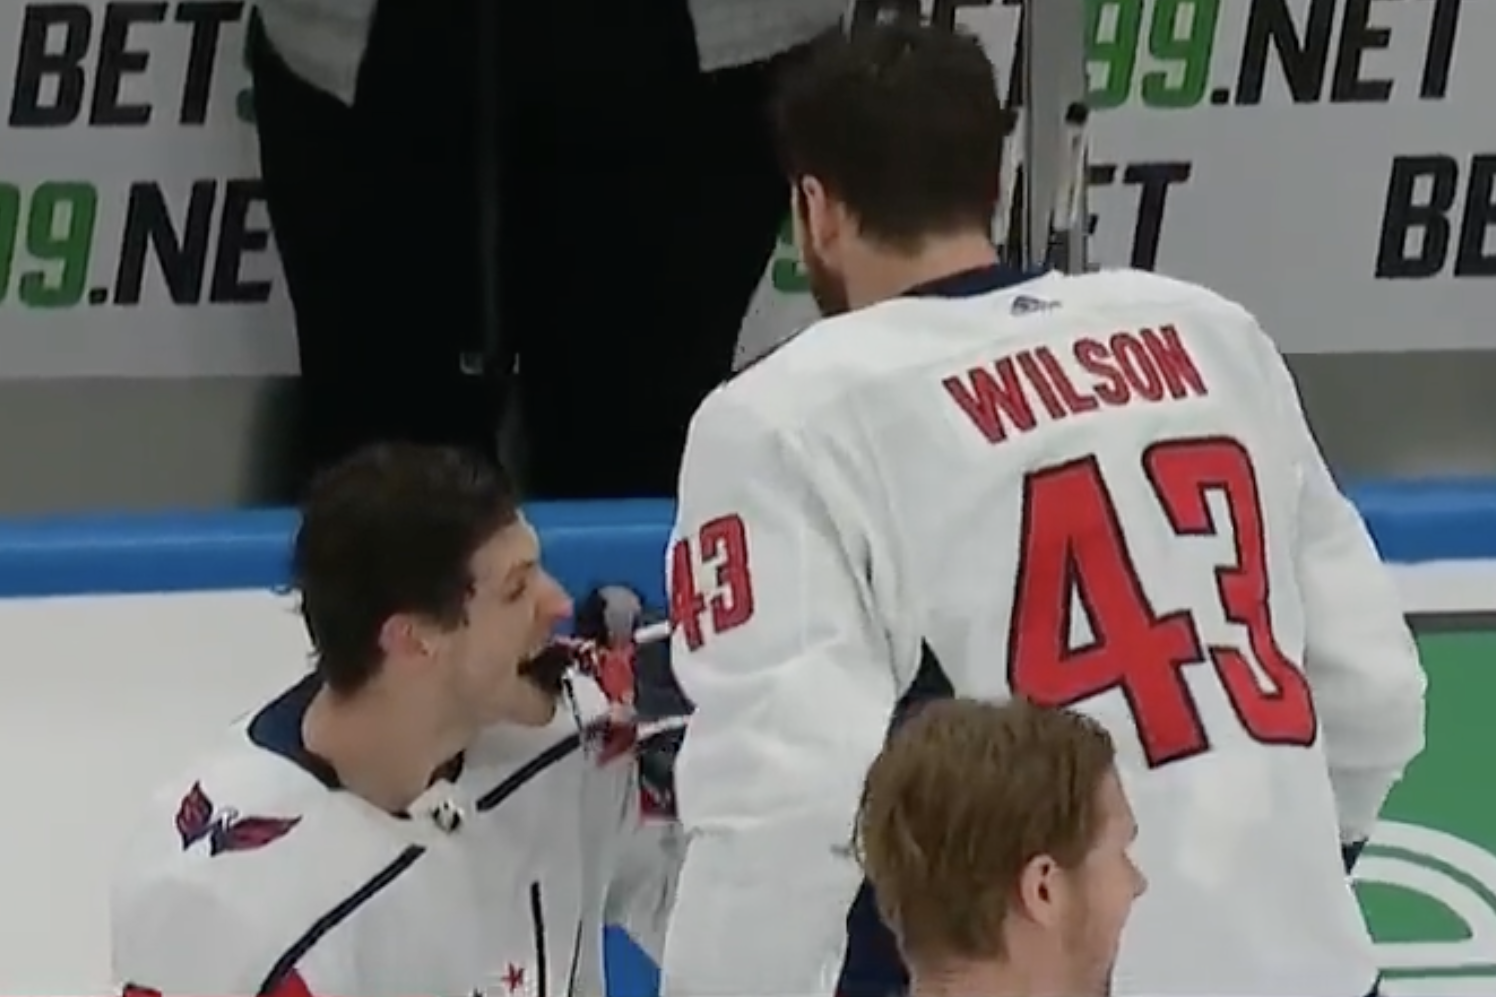 Capitals Tom Wilson and Nic Dowd